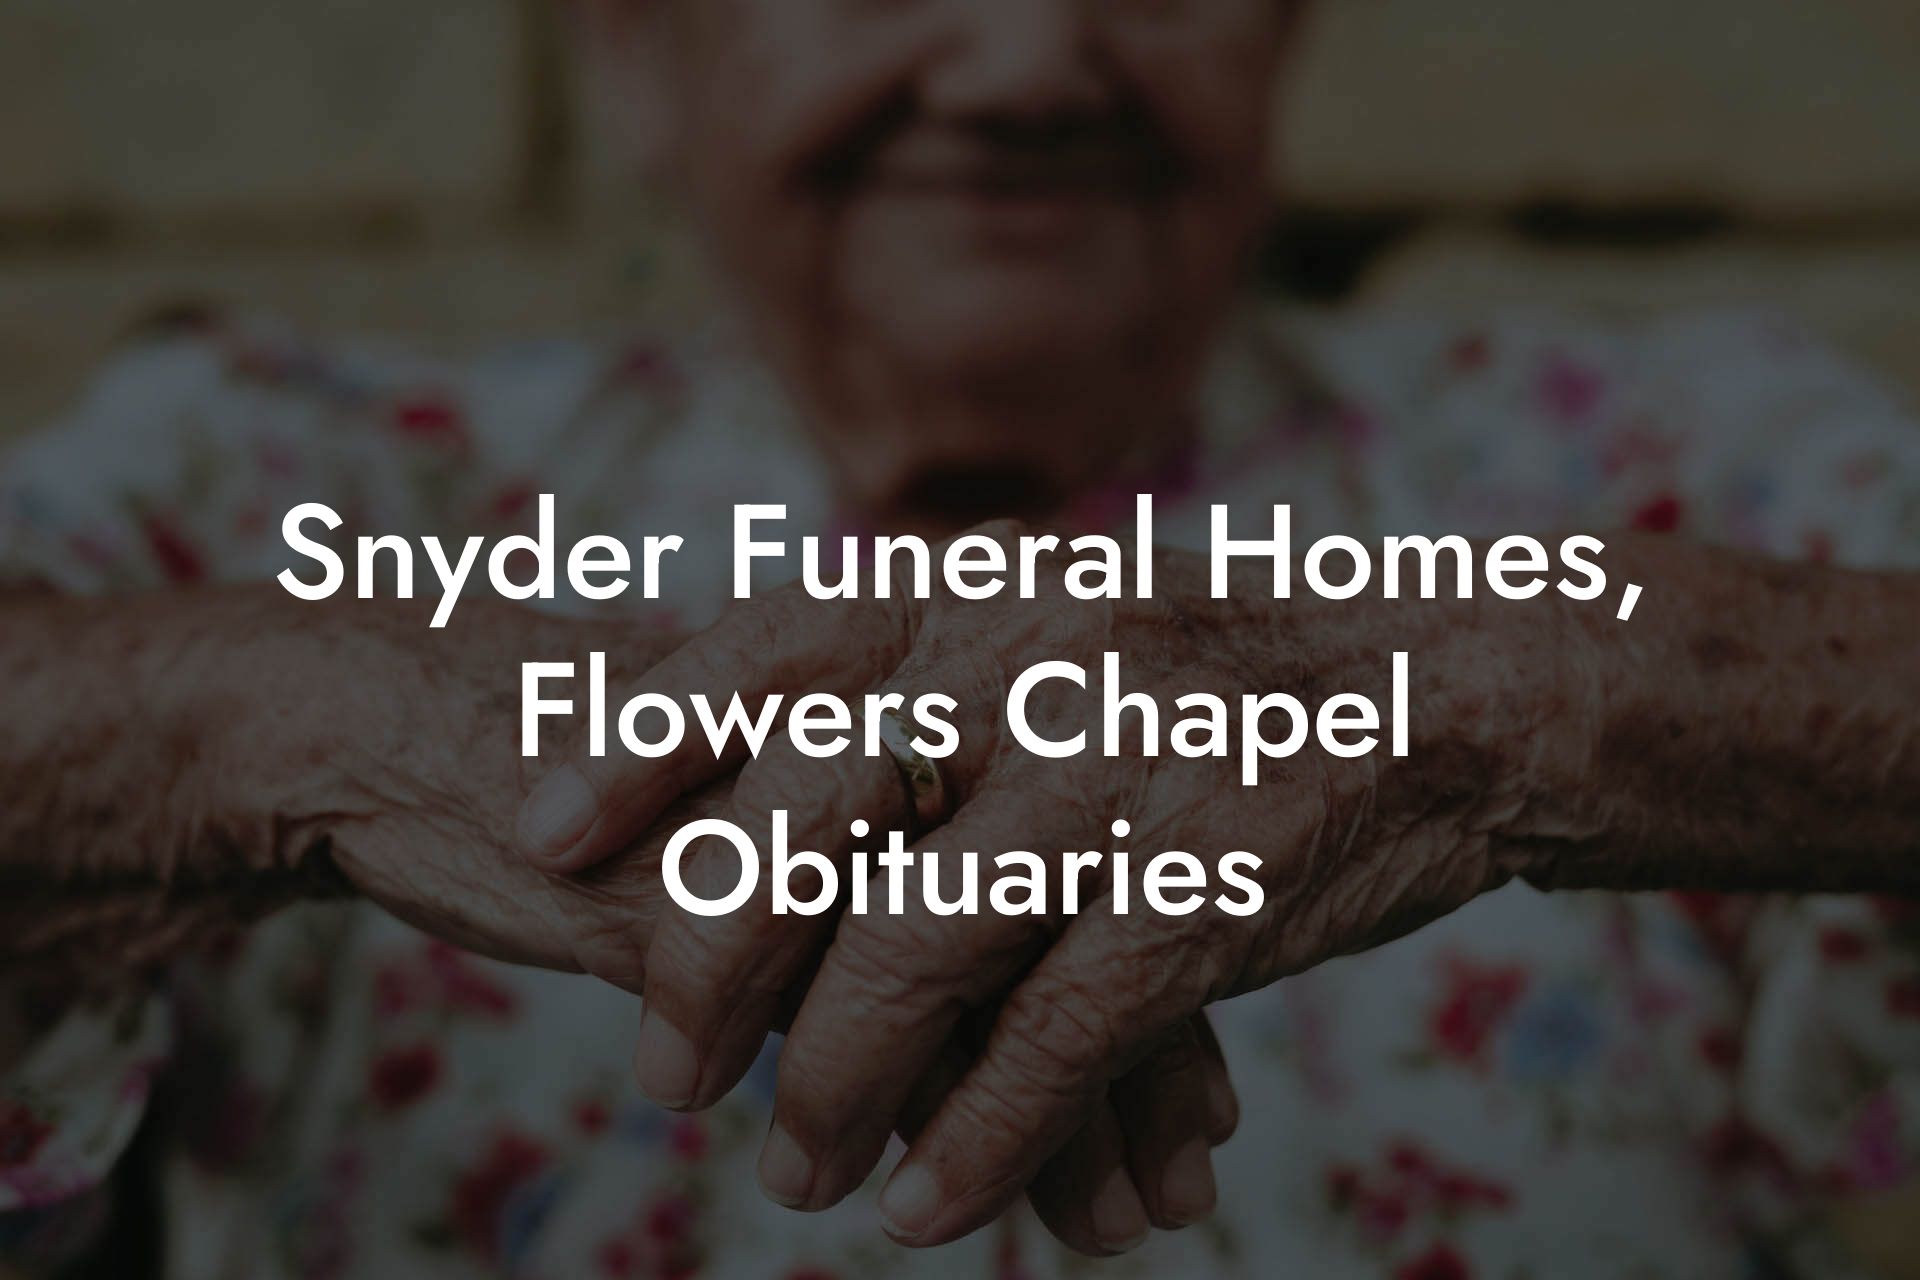 Snyder Funeral Homes, Flowers Chapel Obituaries